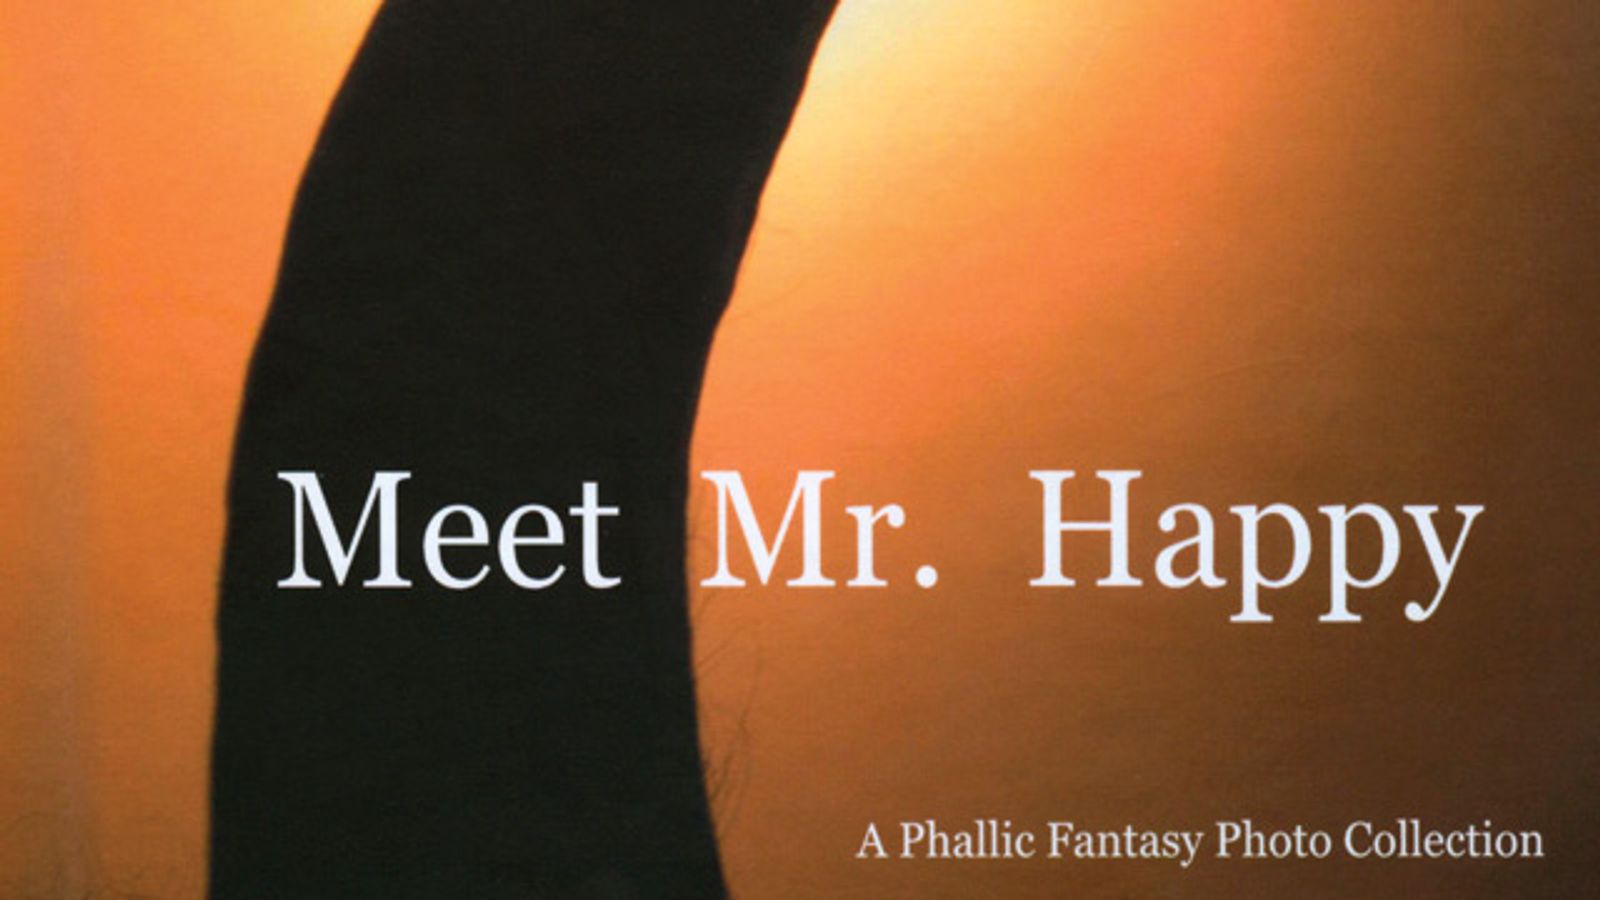 ‘Meet Mr. Happy’ Now Available as Greeting Cards